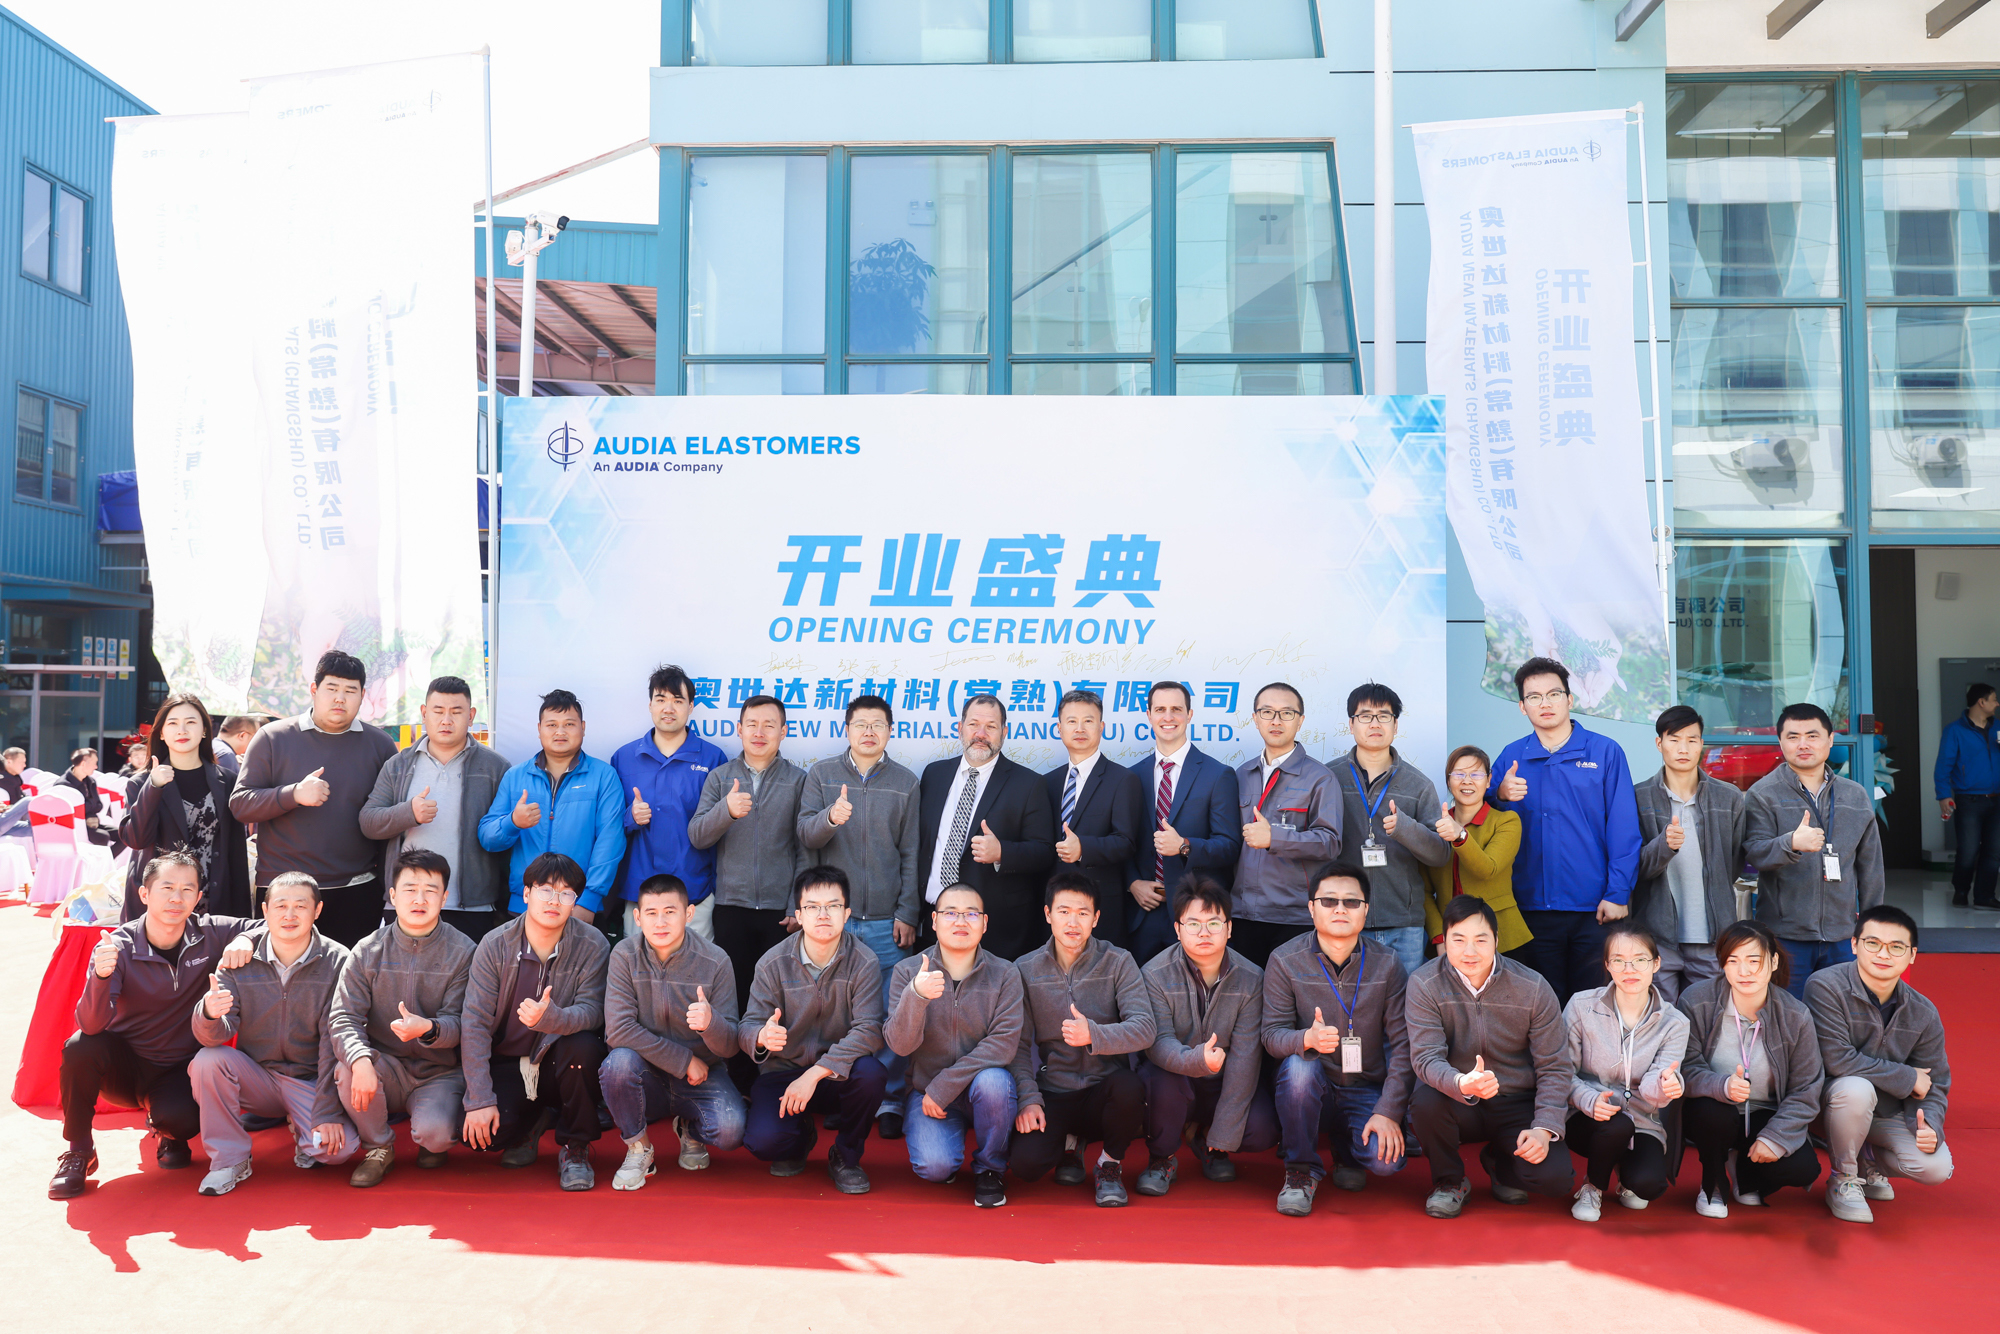 Audia Elastomers team at the grand opening Changshu Ceremony